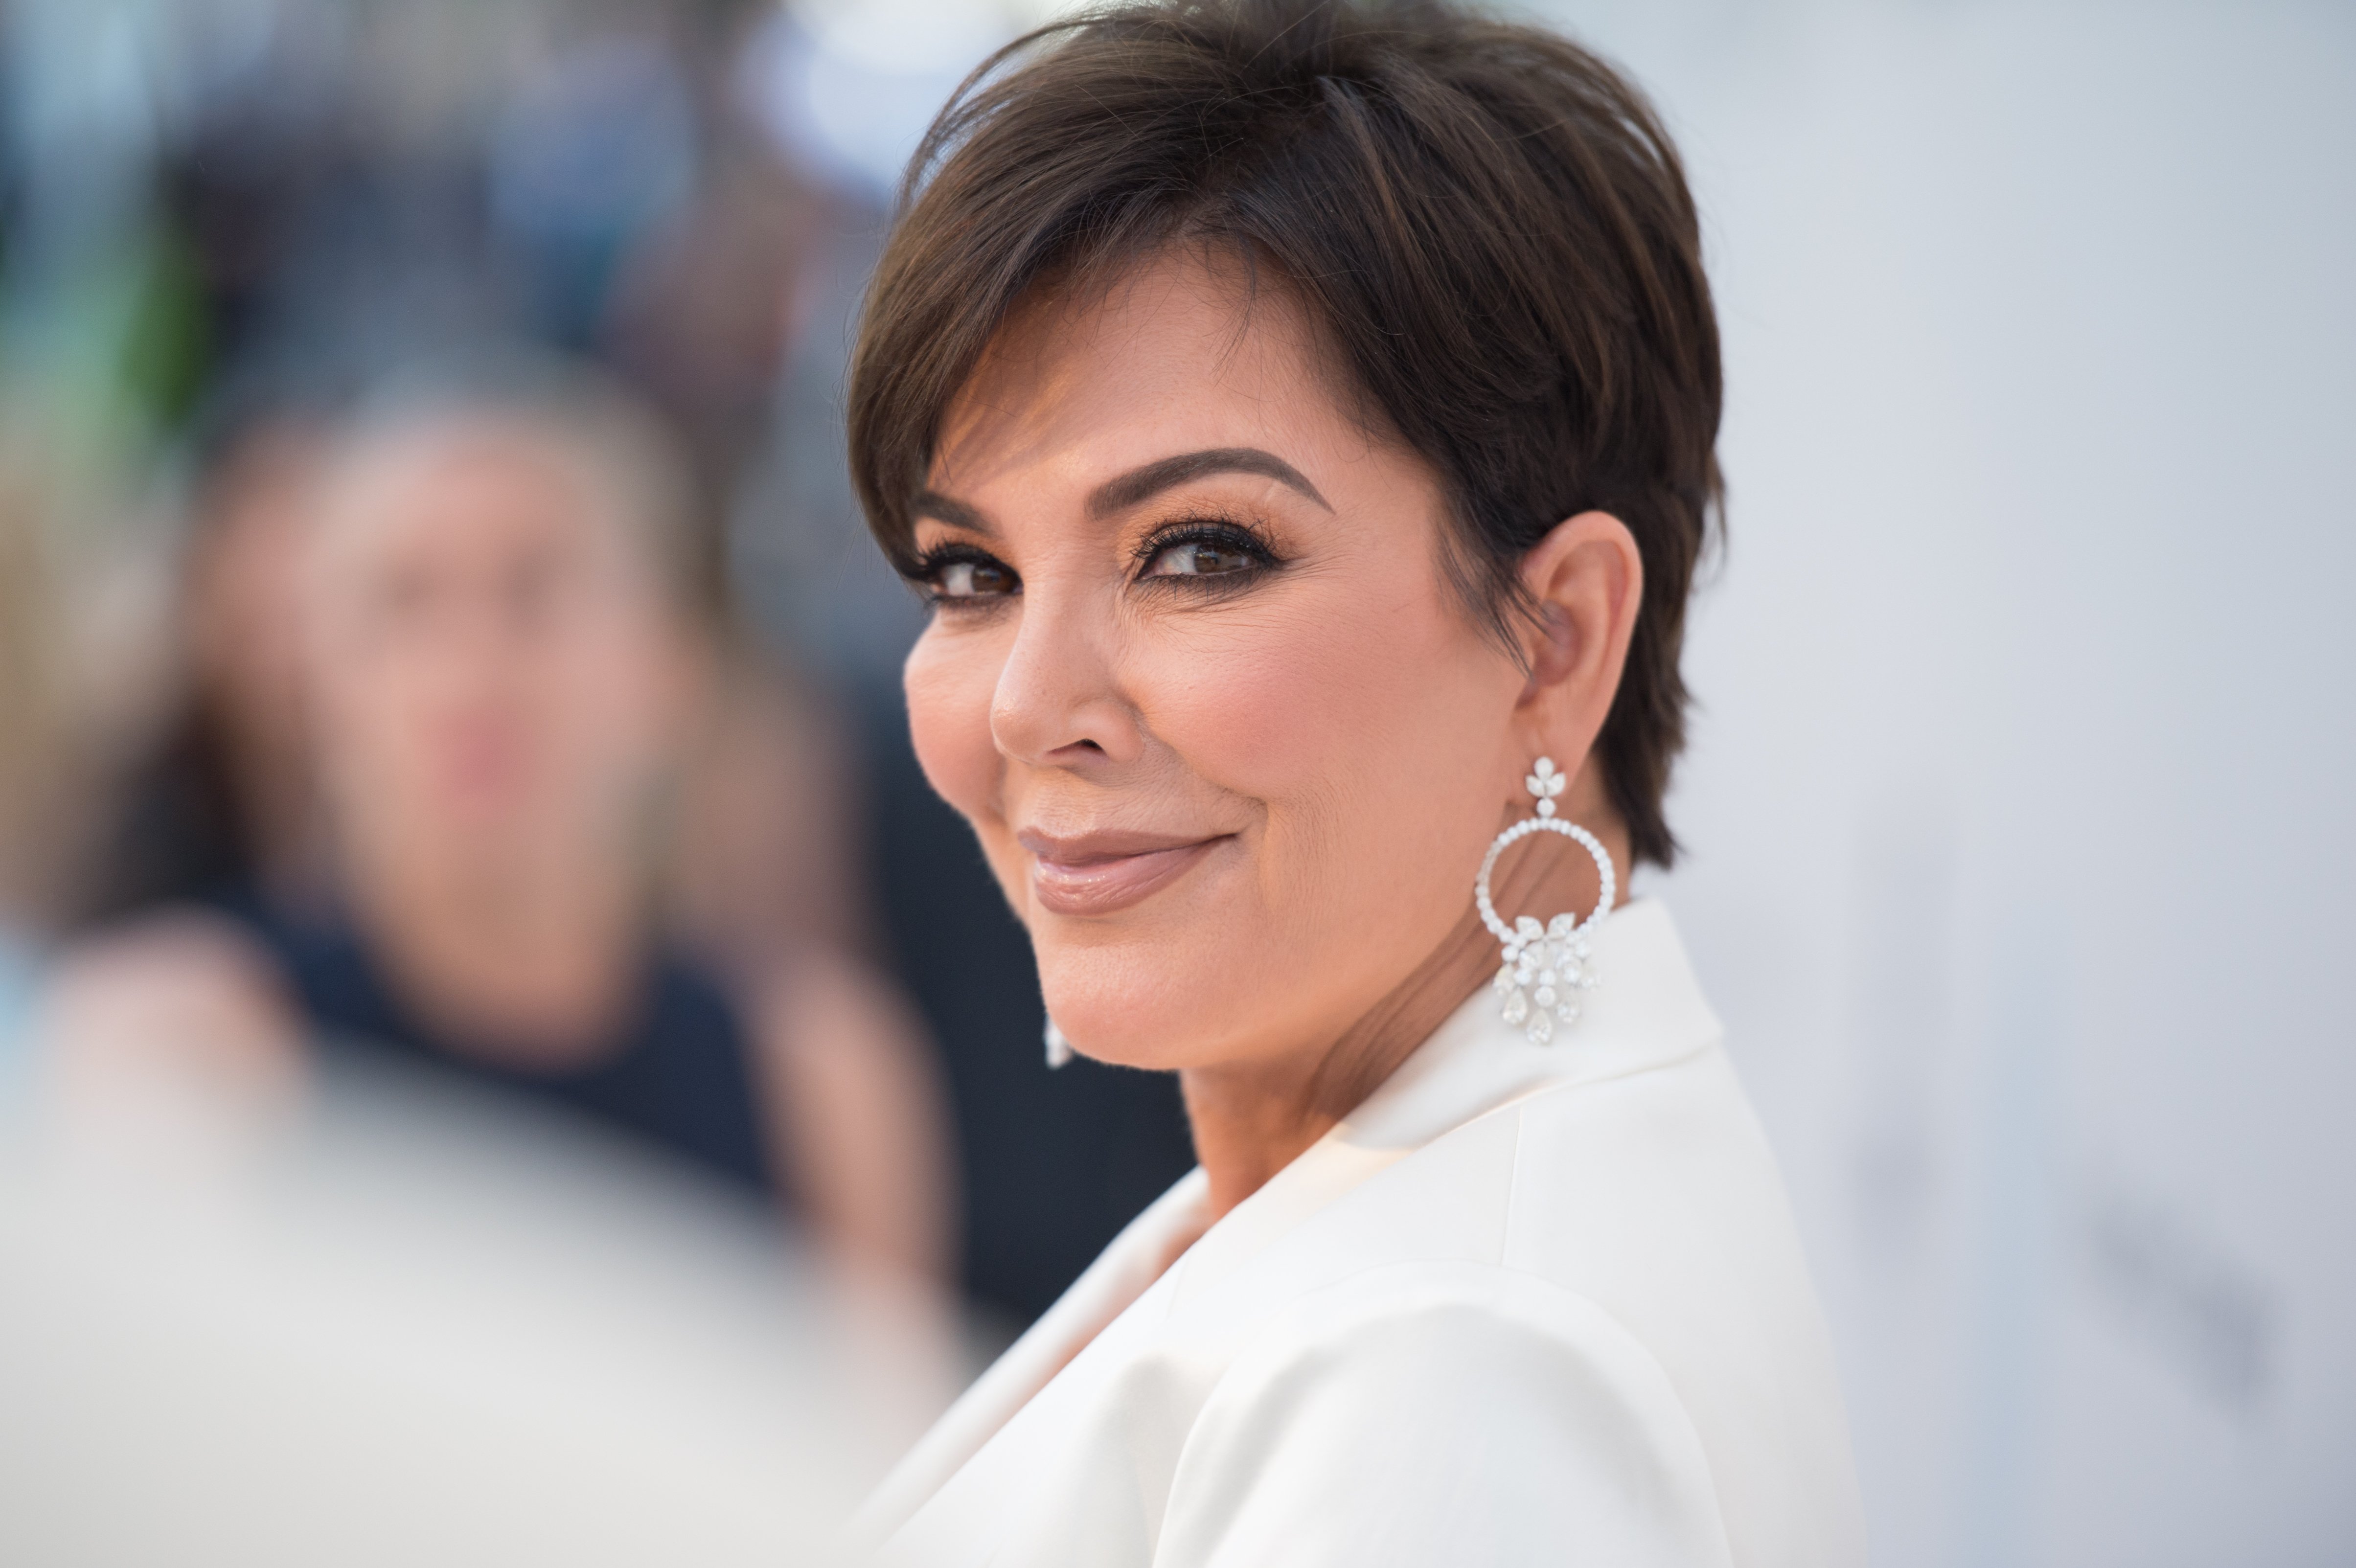 Kris Jenner attending the amfAR Cannes Gala in March 2019. | Photo: Getty images